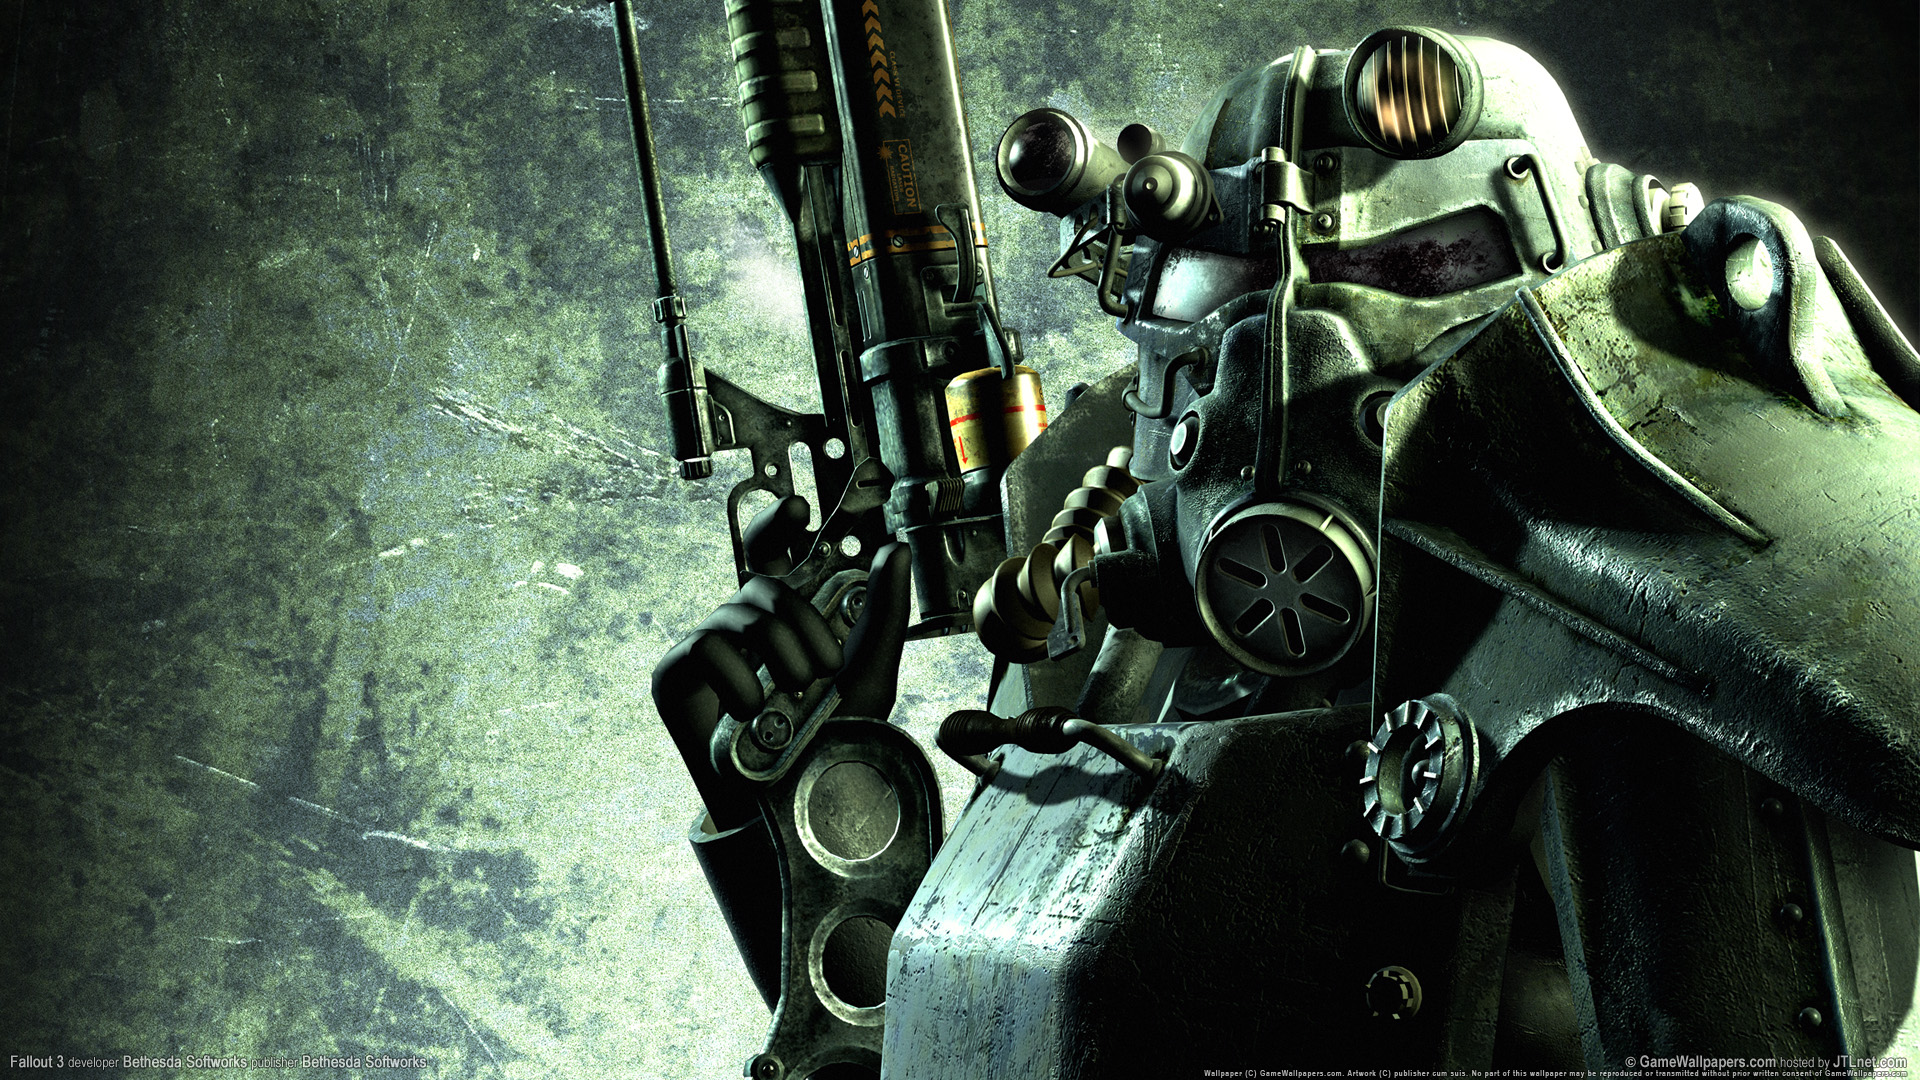 Image 12 - Fallout 3 - Remastered Survival Edition mod for Fallout 3 - ModDB